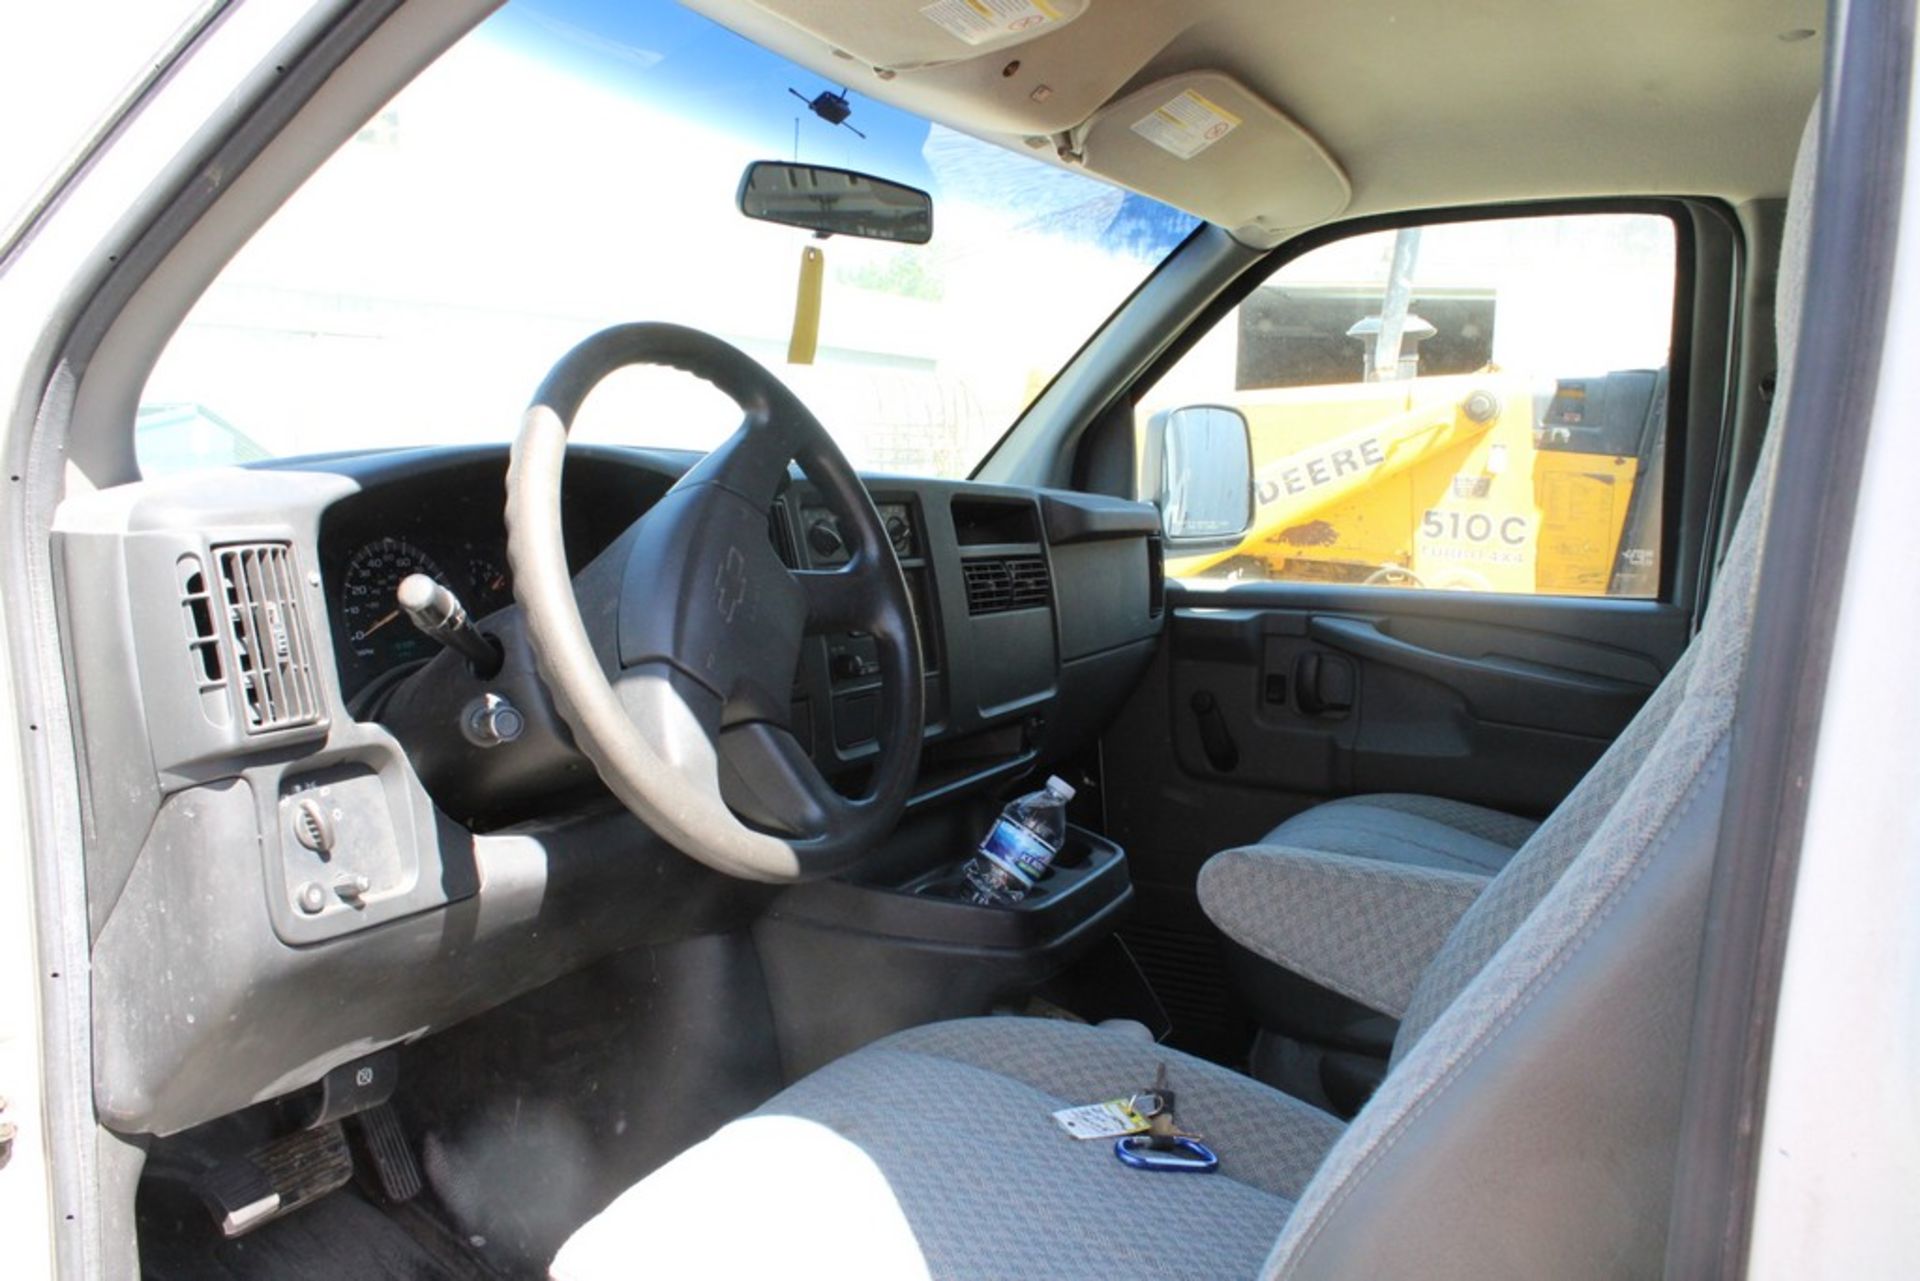 2003 CHEVROLET MODEL 2500 CARGO VAN, VIN: 1GCFG25T131159094, AUTOMATIC TRANSMISSION, APPROX. 167,000 - Image 7 of 10